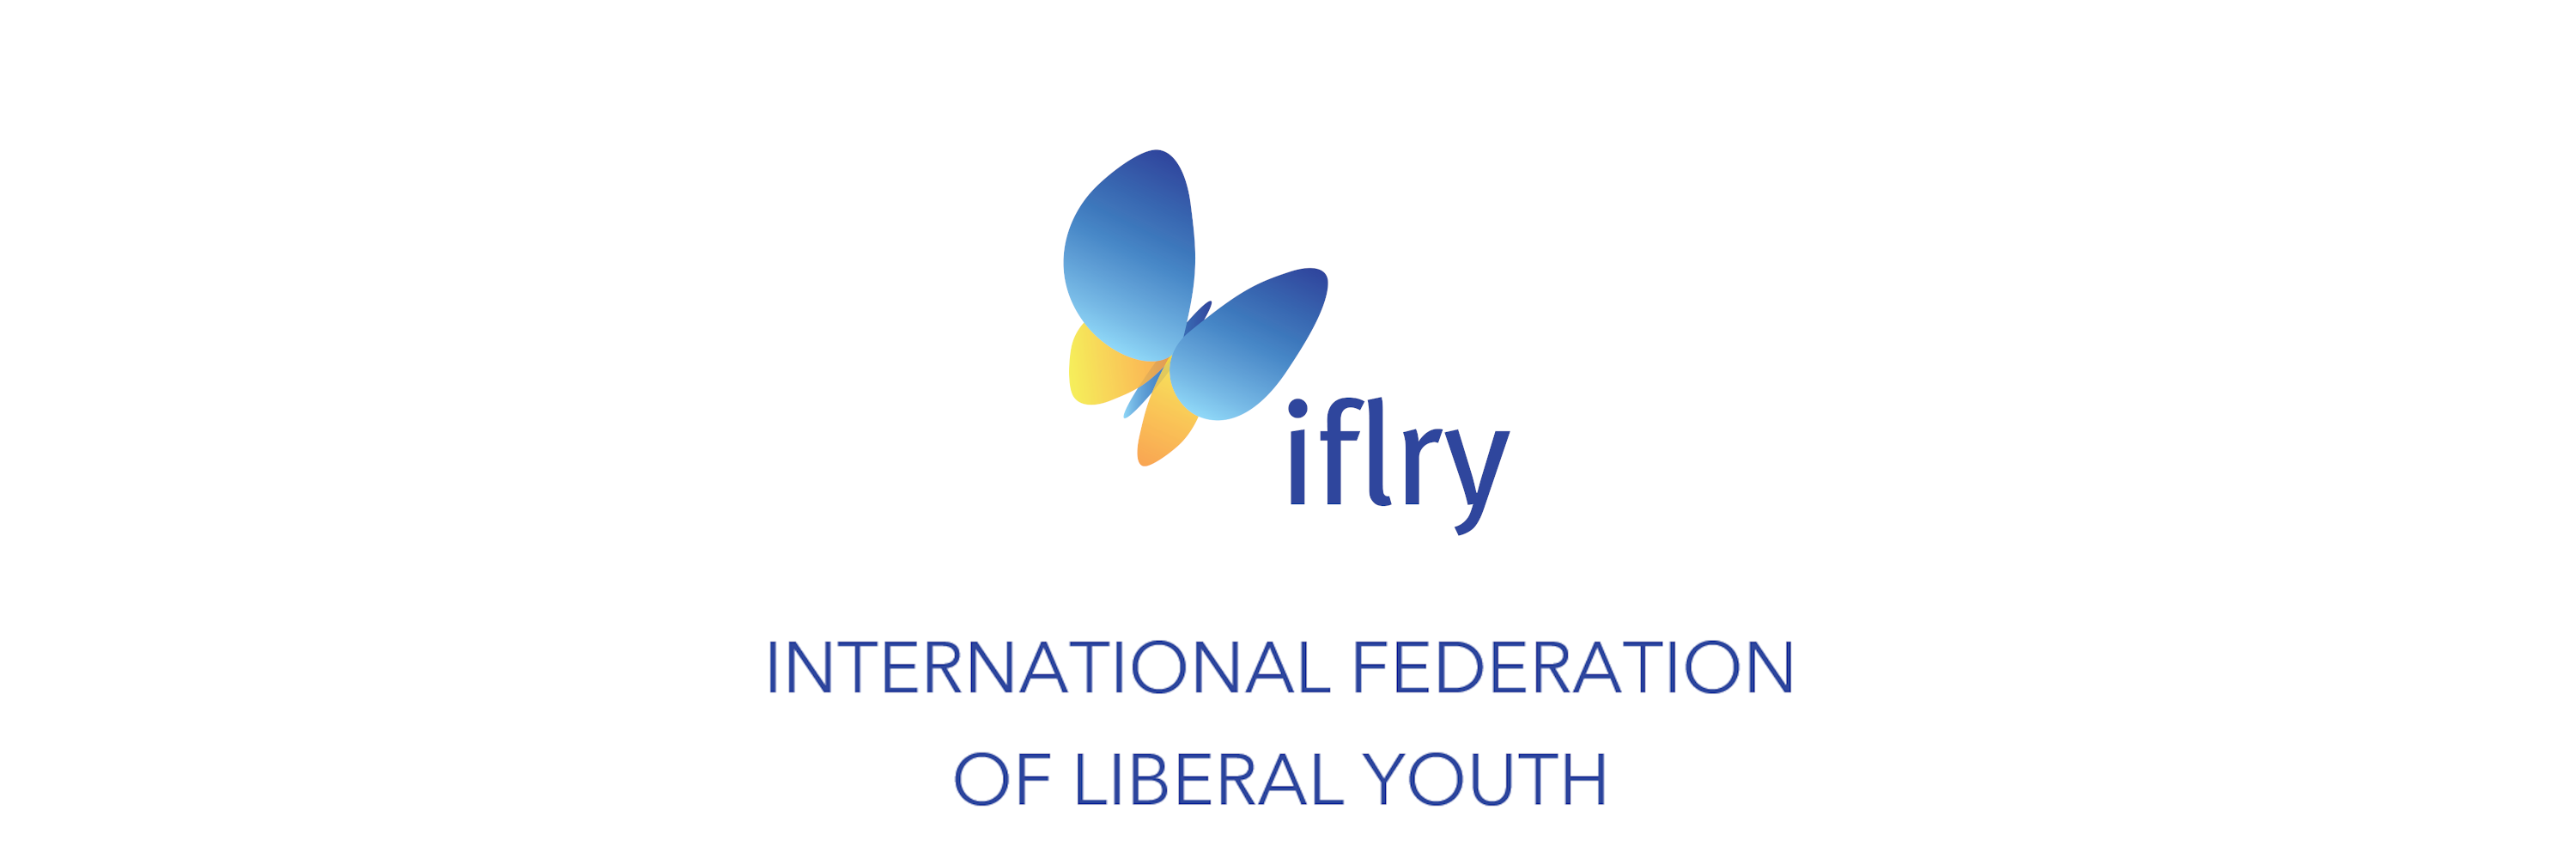 iFlry